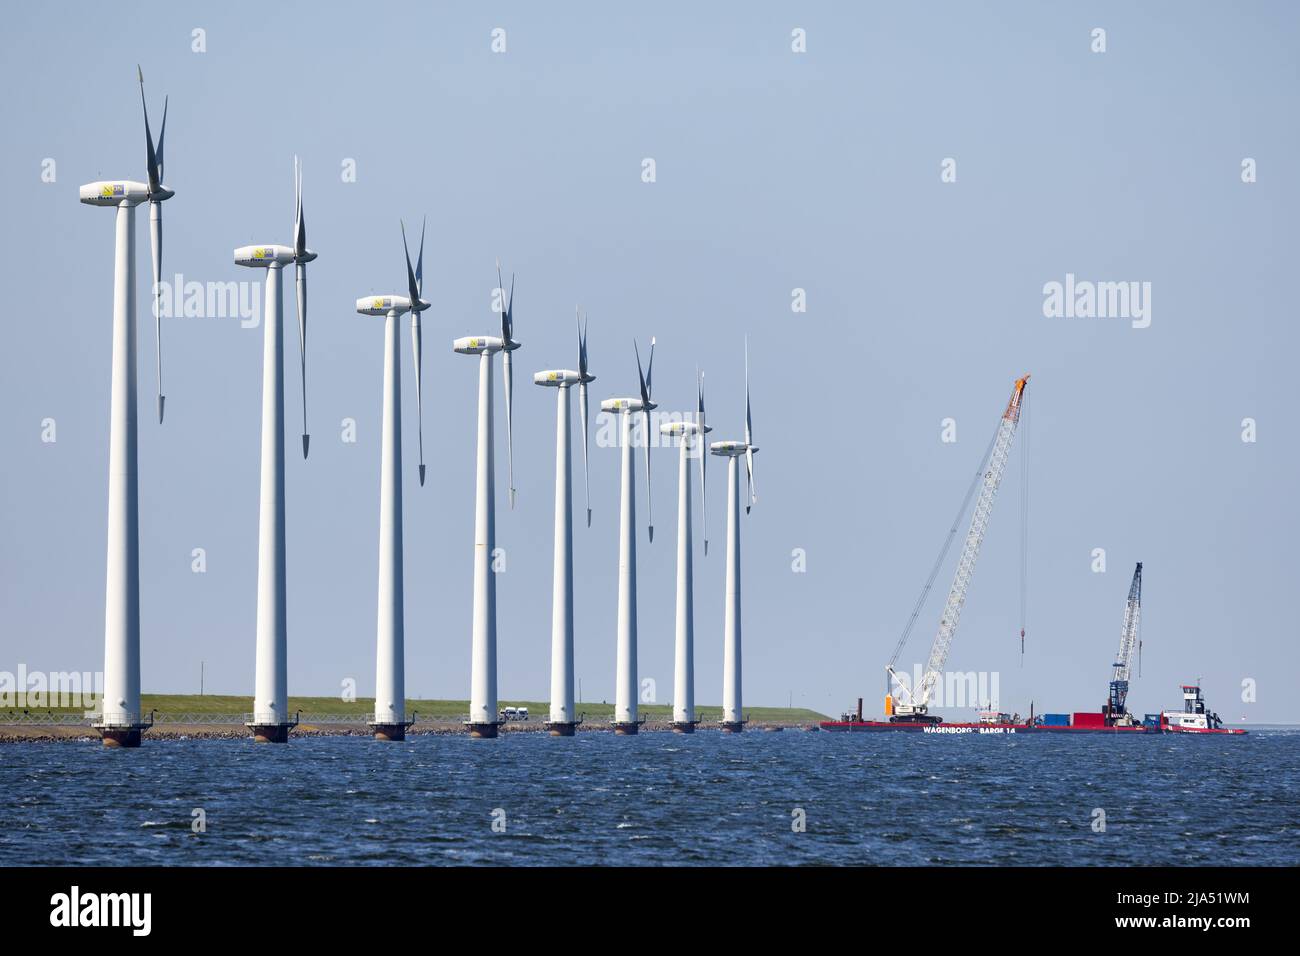 Lelystad, The Netherlands - April 22, 2022: Crane ship and supply vessel busy with demolition offshore wind turbine farm Stock Photo